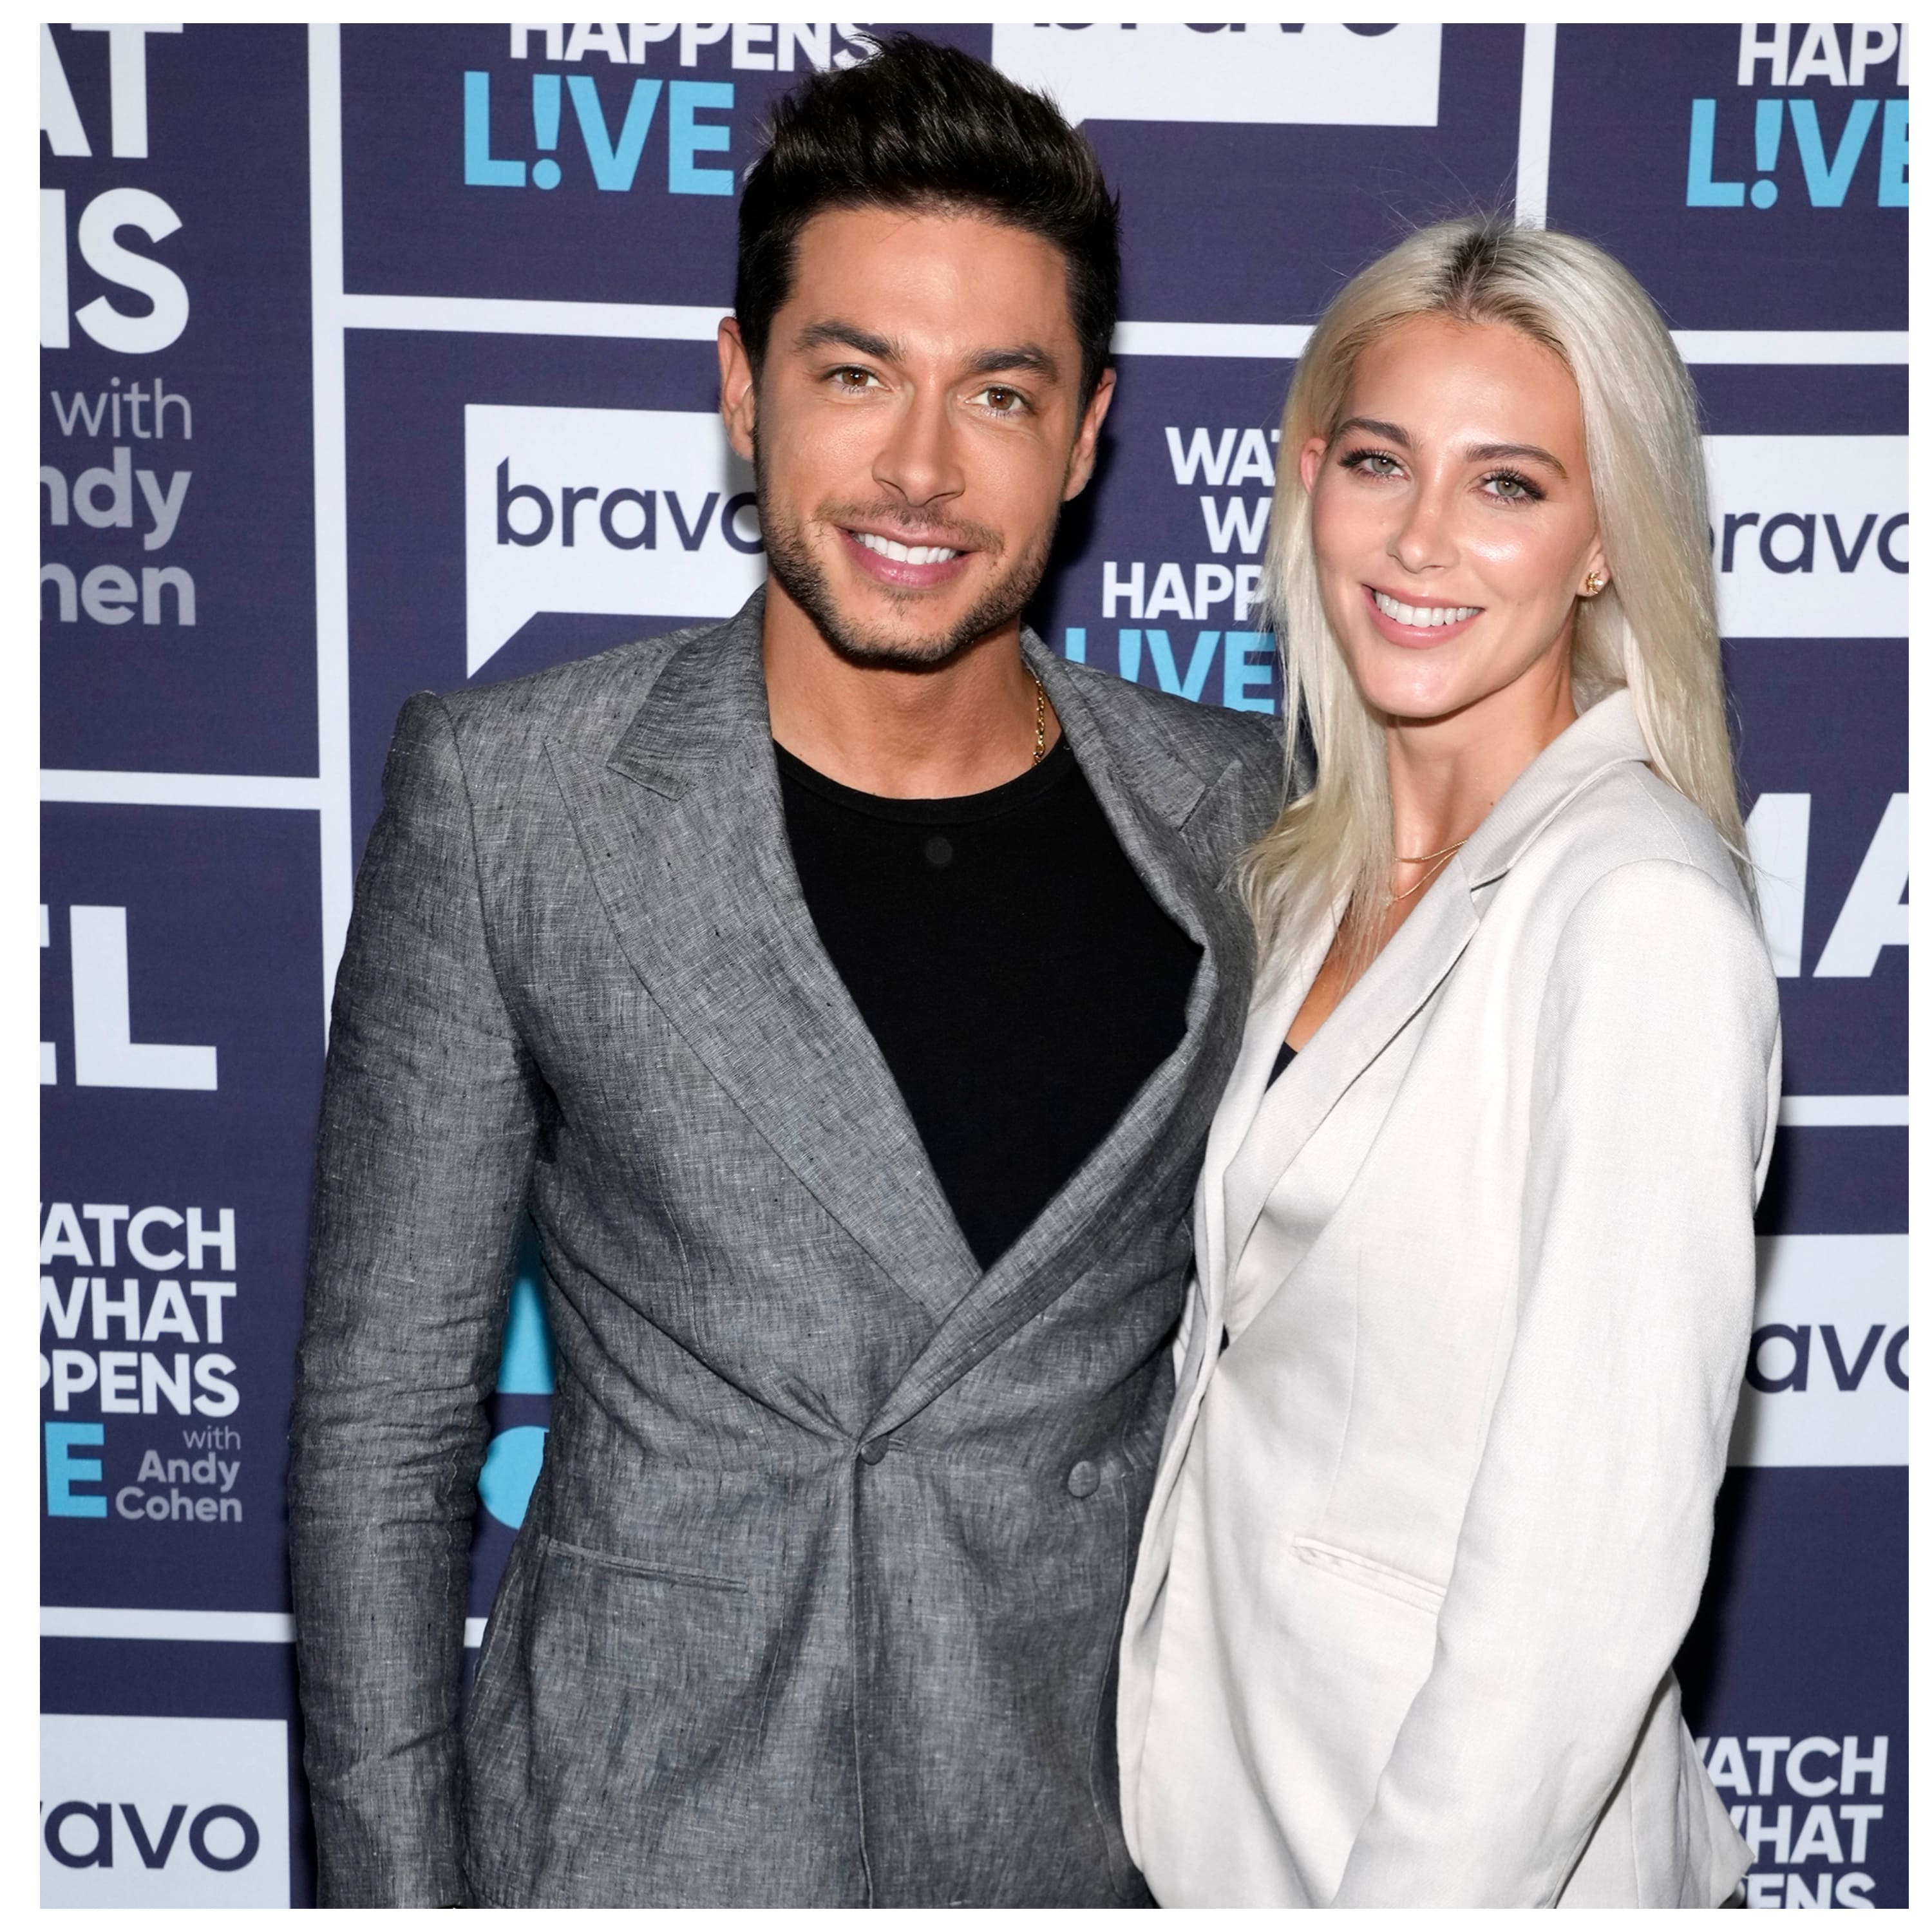 Andrea Denver from 'Summer House' and Lexi Sundin at the 'WWHL' Clubhouse